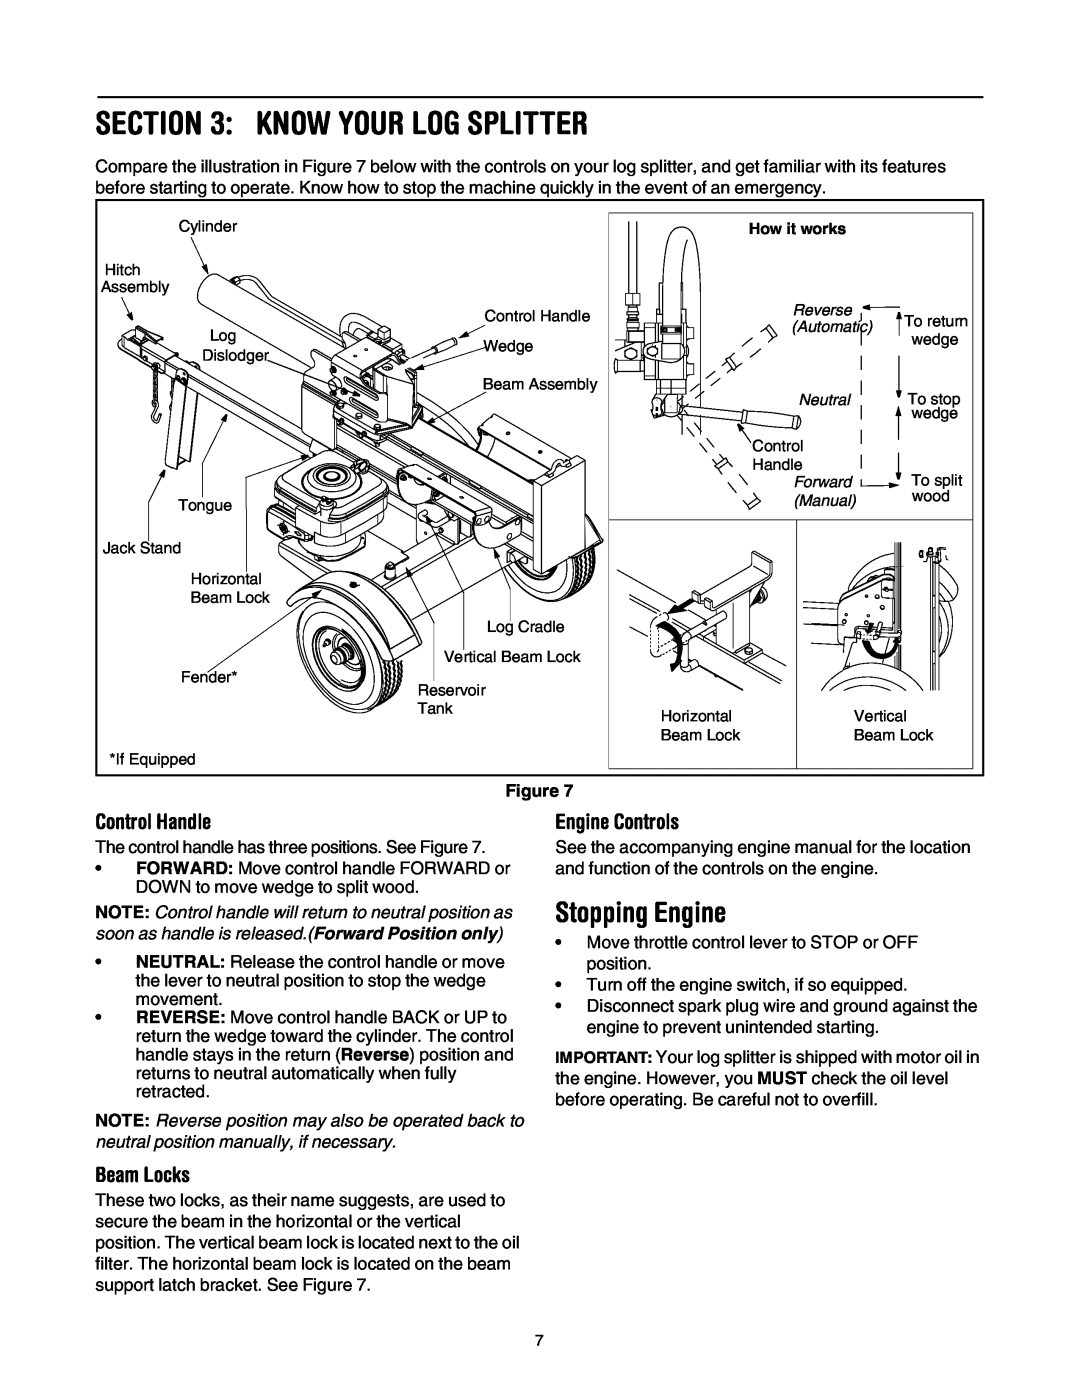 MTD 500, 510 manual Know Your Log Splitter, Stopping Engine, Control Handle, Beam Locks, Engine Controls 